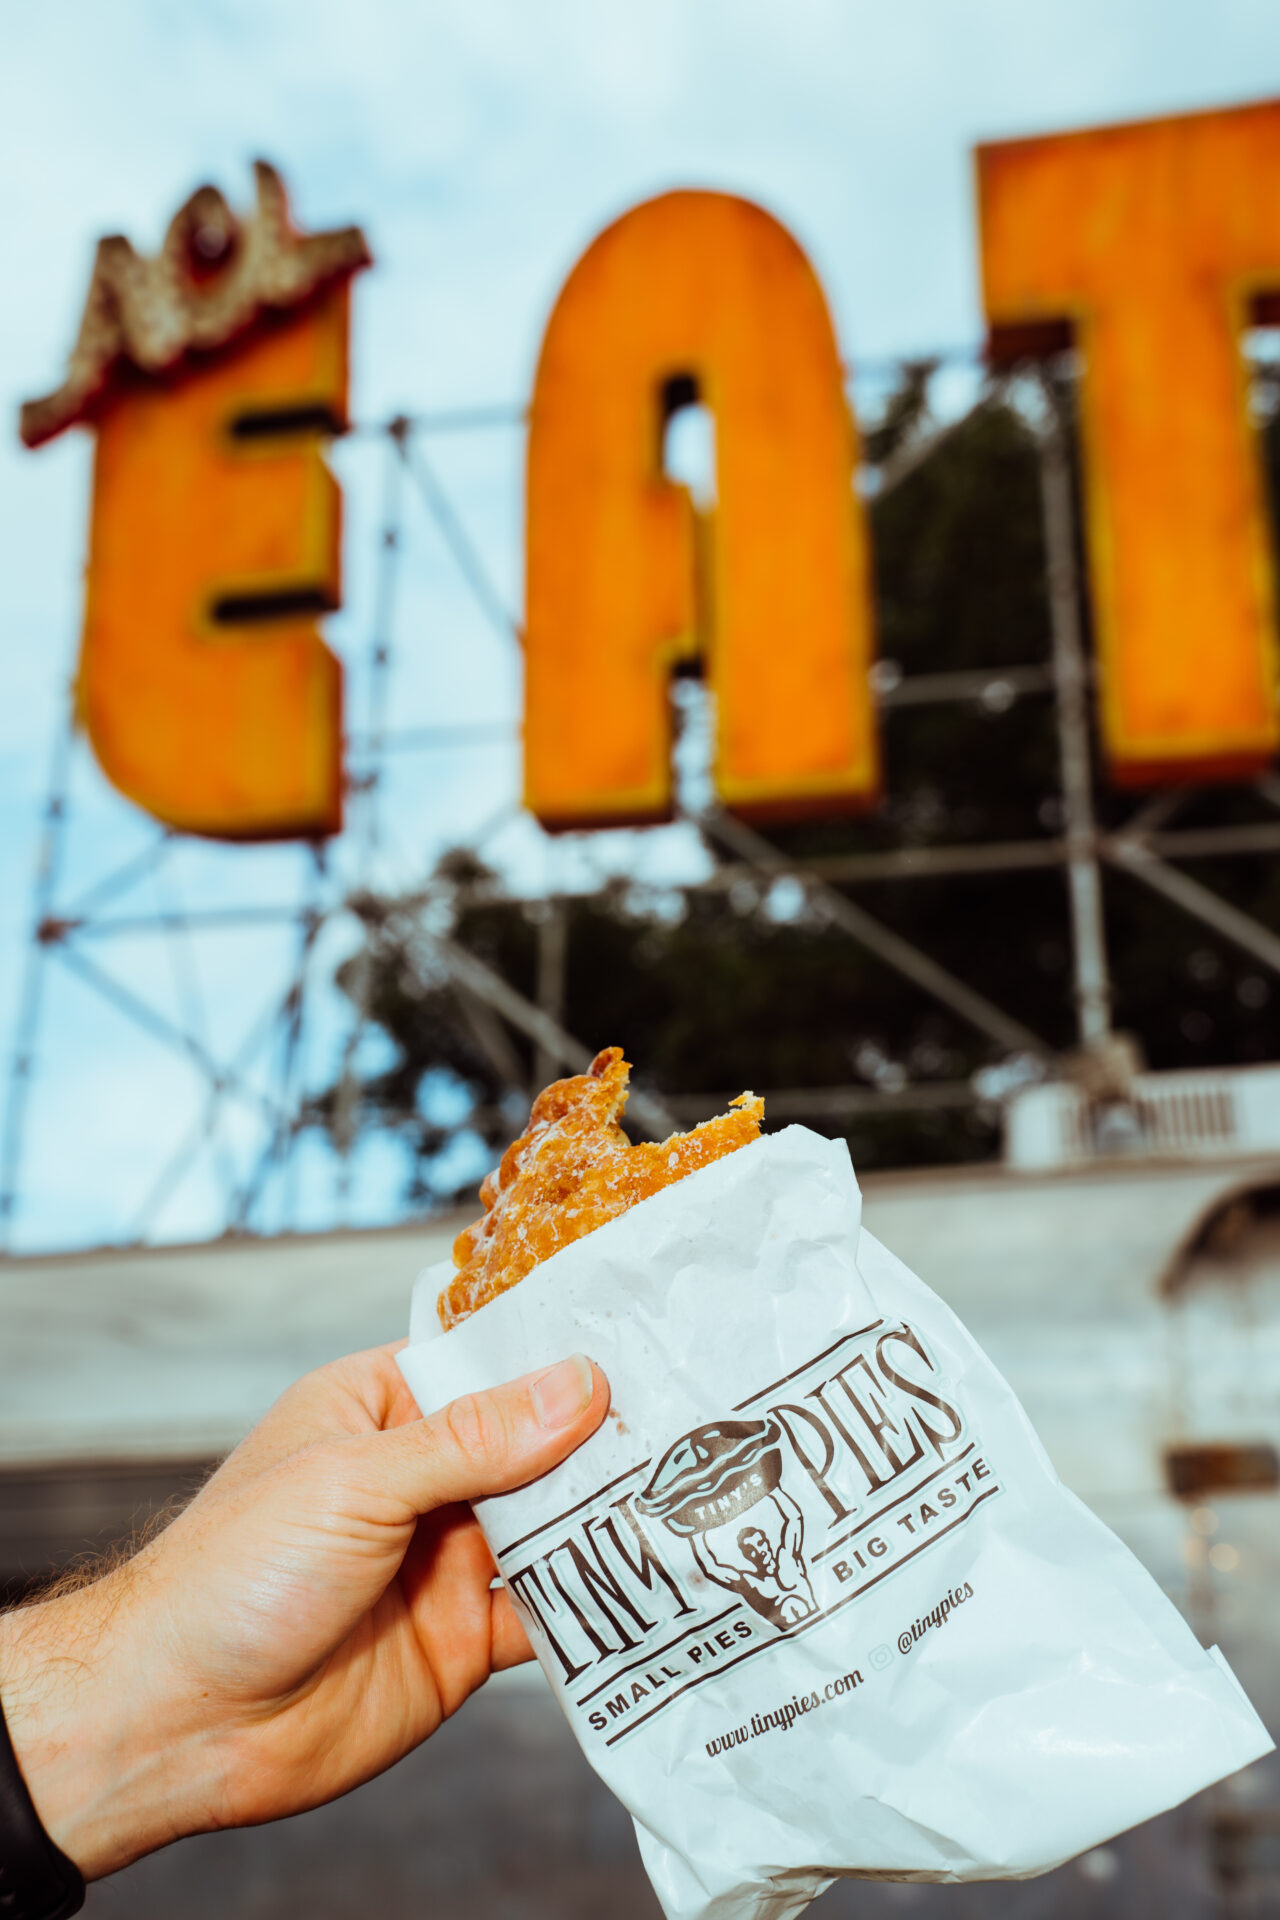 ACL Eats Tiny Pies by Jackie Lee Young for ACL Fest DSC